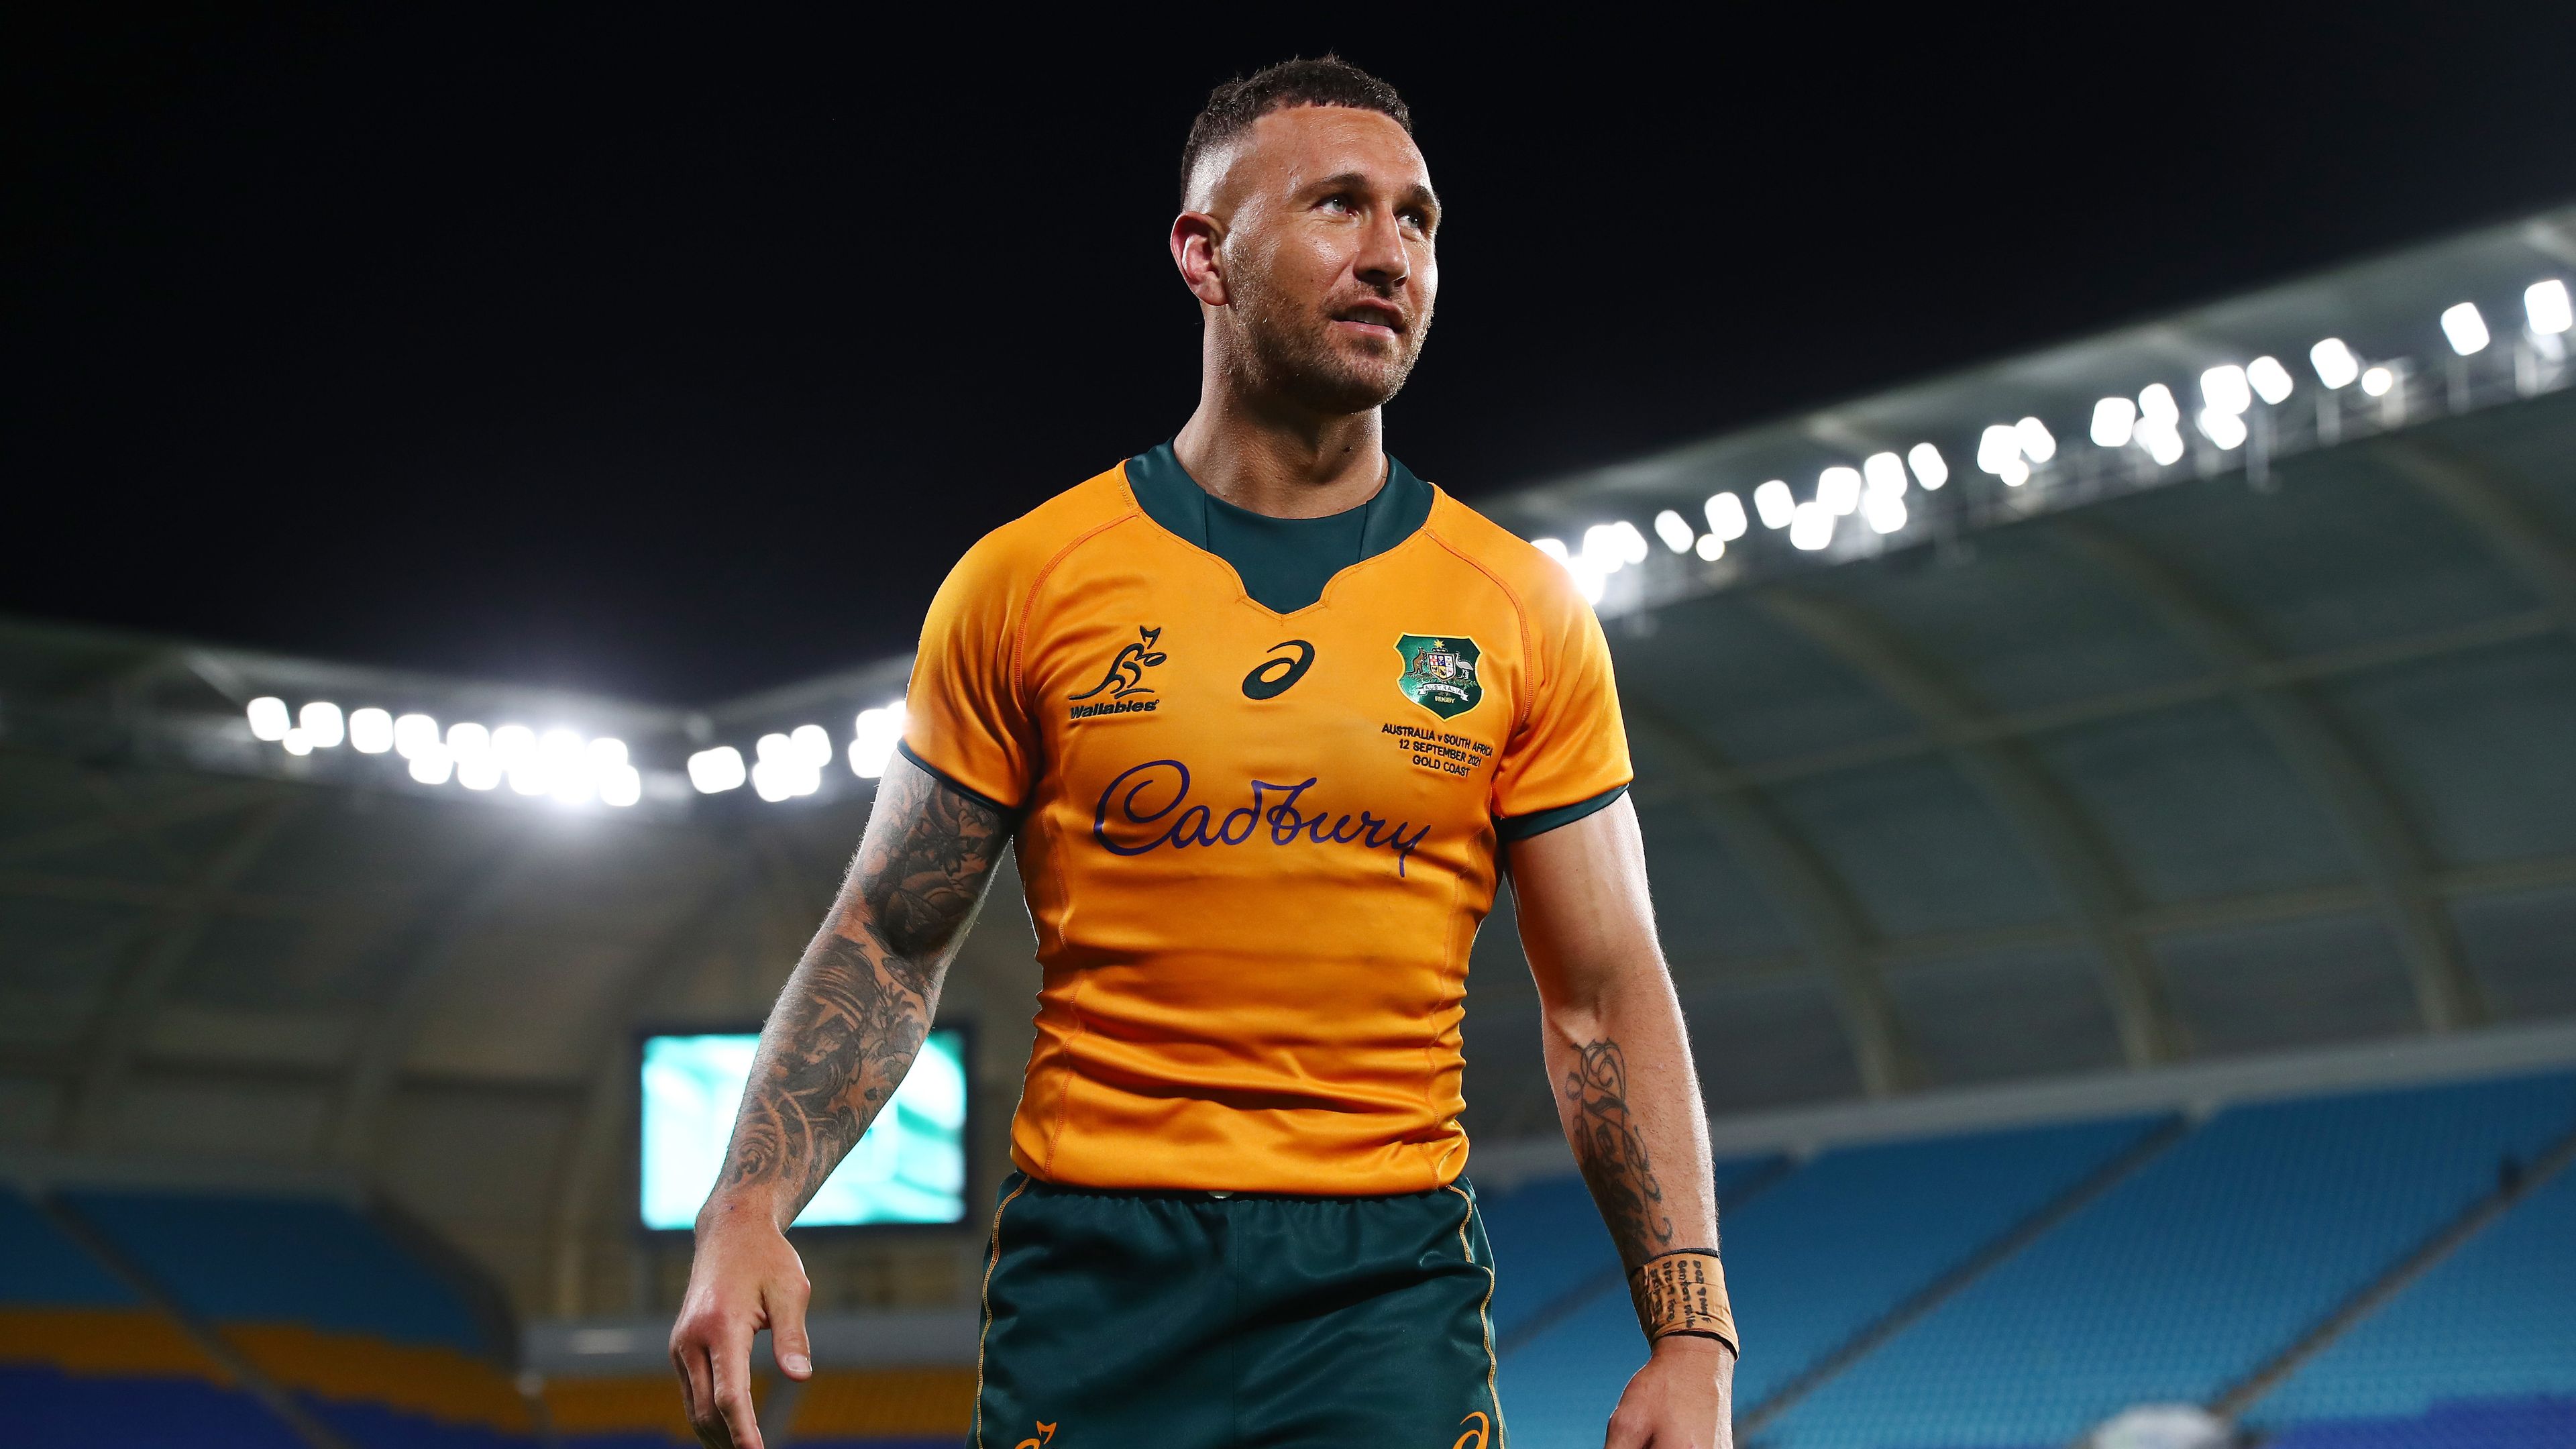 Quade Cooper of the Wallabies celebrates winning the Rugby Championship match between the South Africa Springboks in 2021.